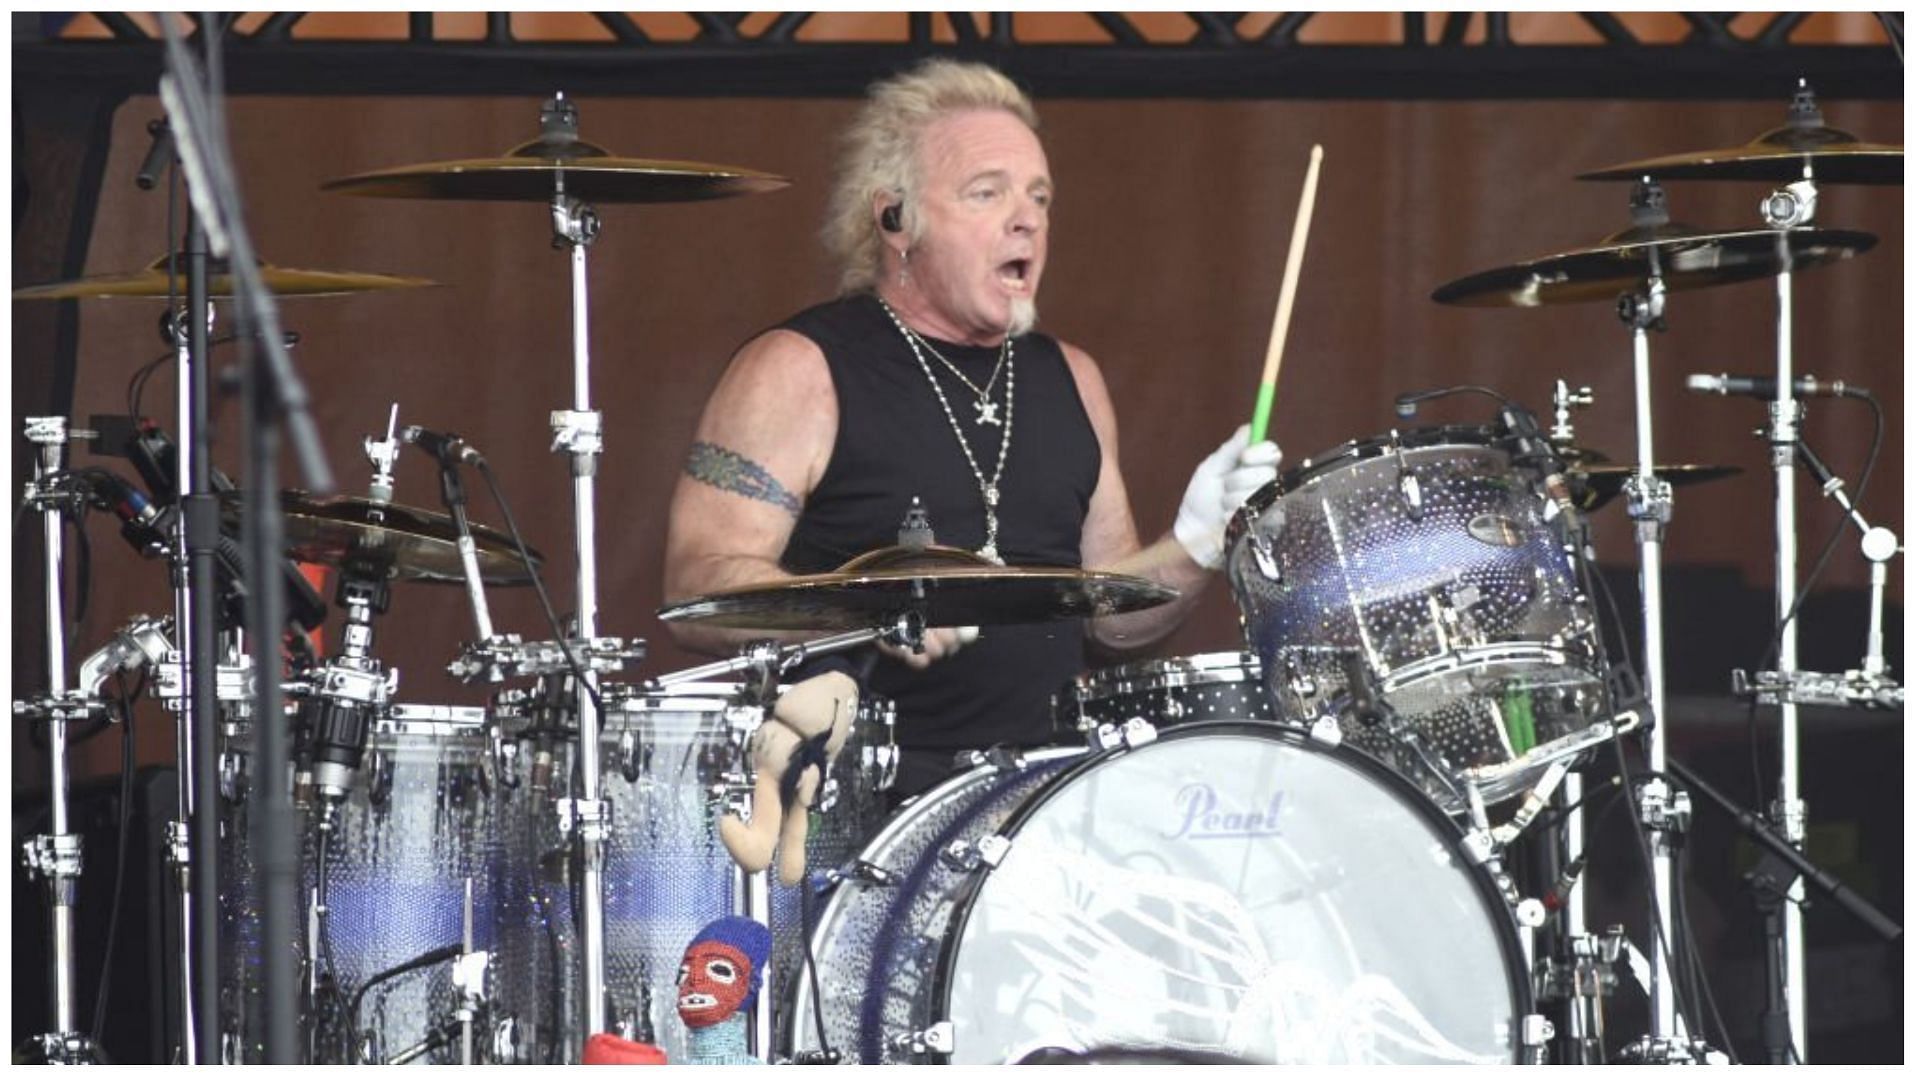 Joey Kramer took a leave from the band in March 2022 (Image via Tim Mosenfelder/Getty Images)